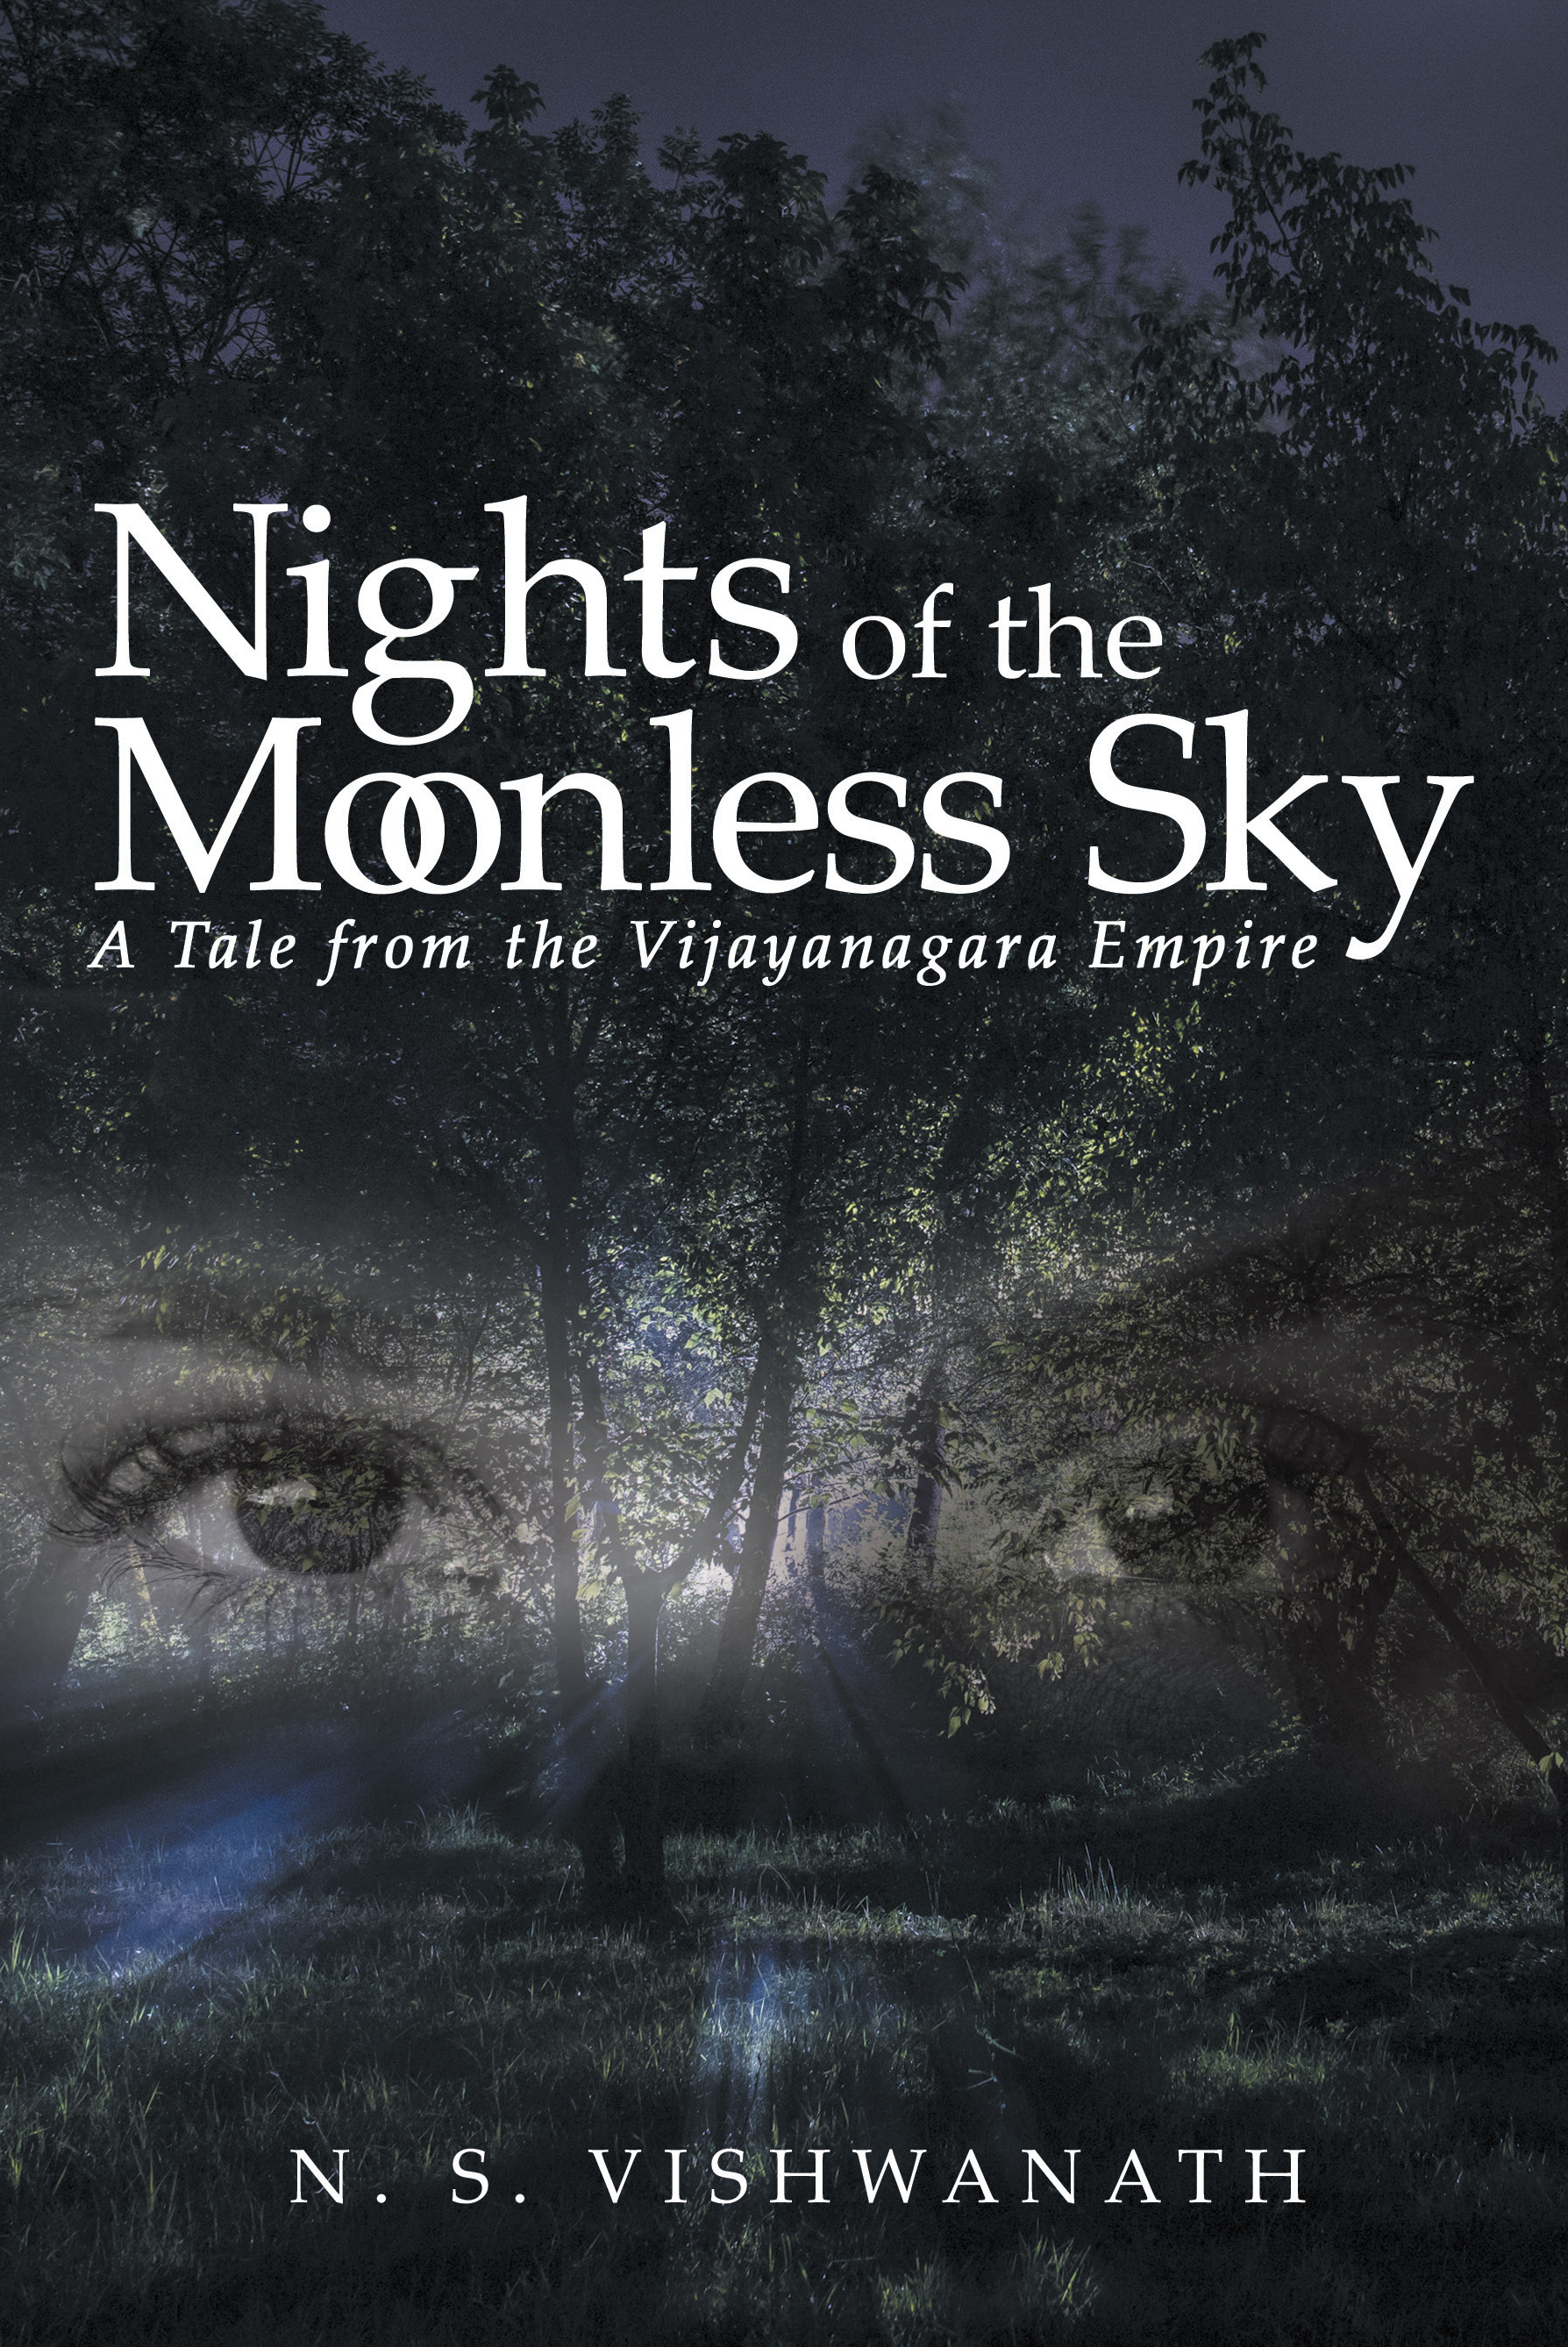 “Nights of the Moonless Sky: A Tale from the Vijayanagara Empire” by N. S. Vishwanath 
